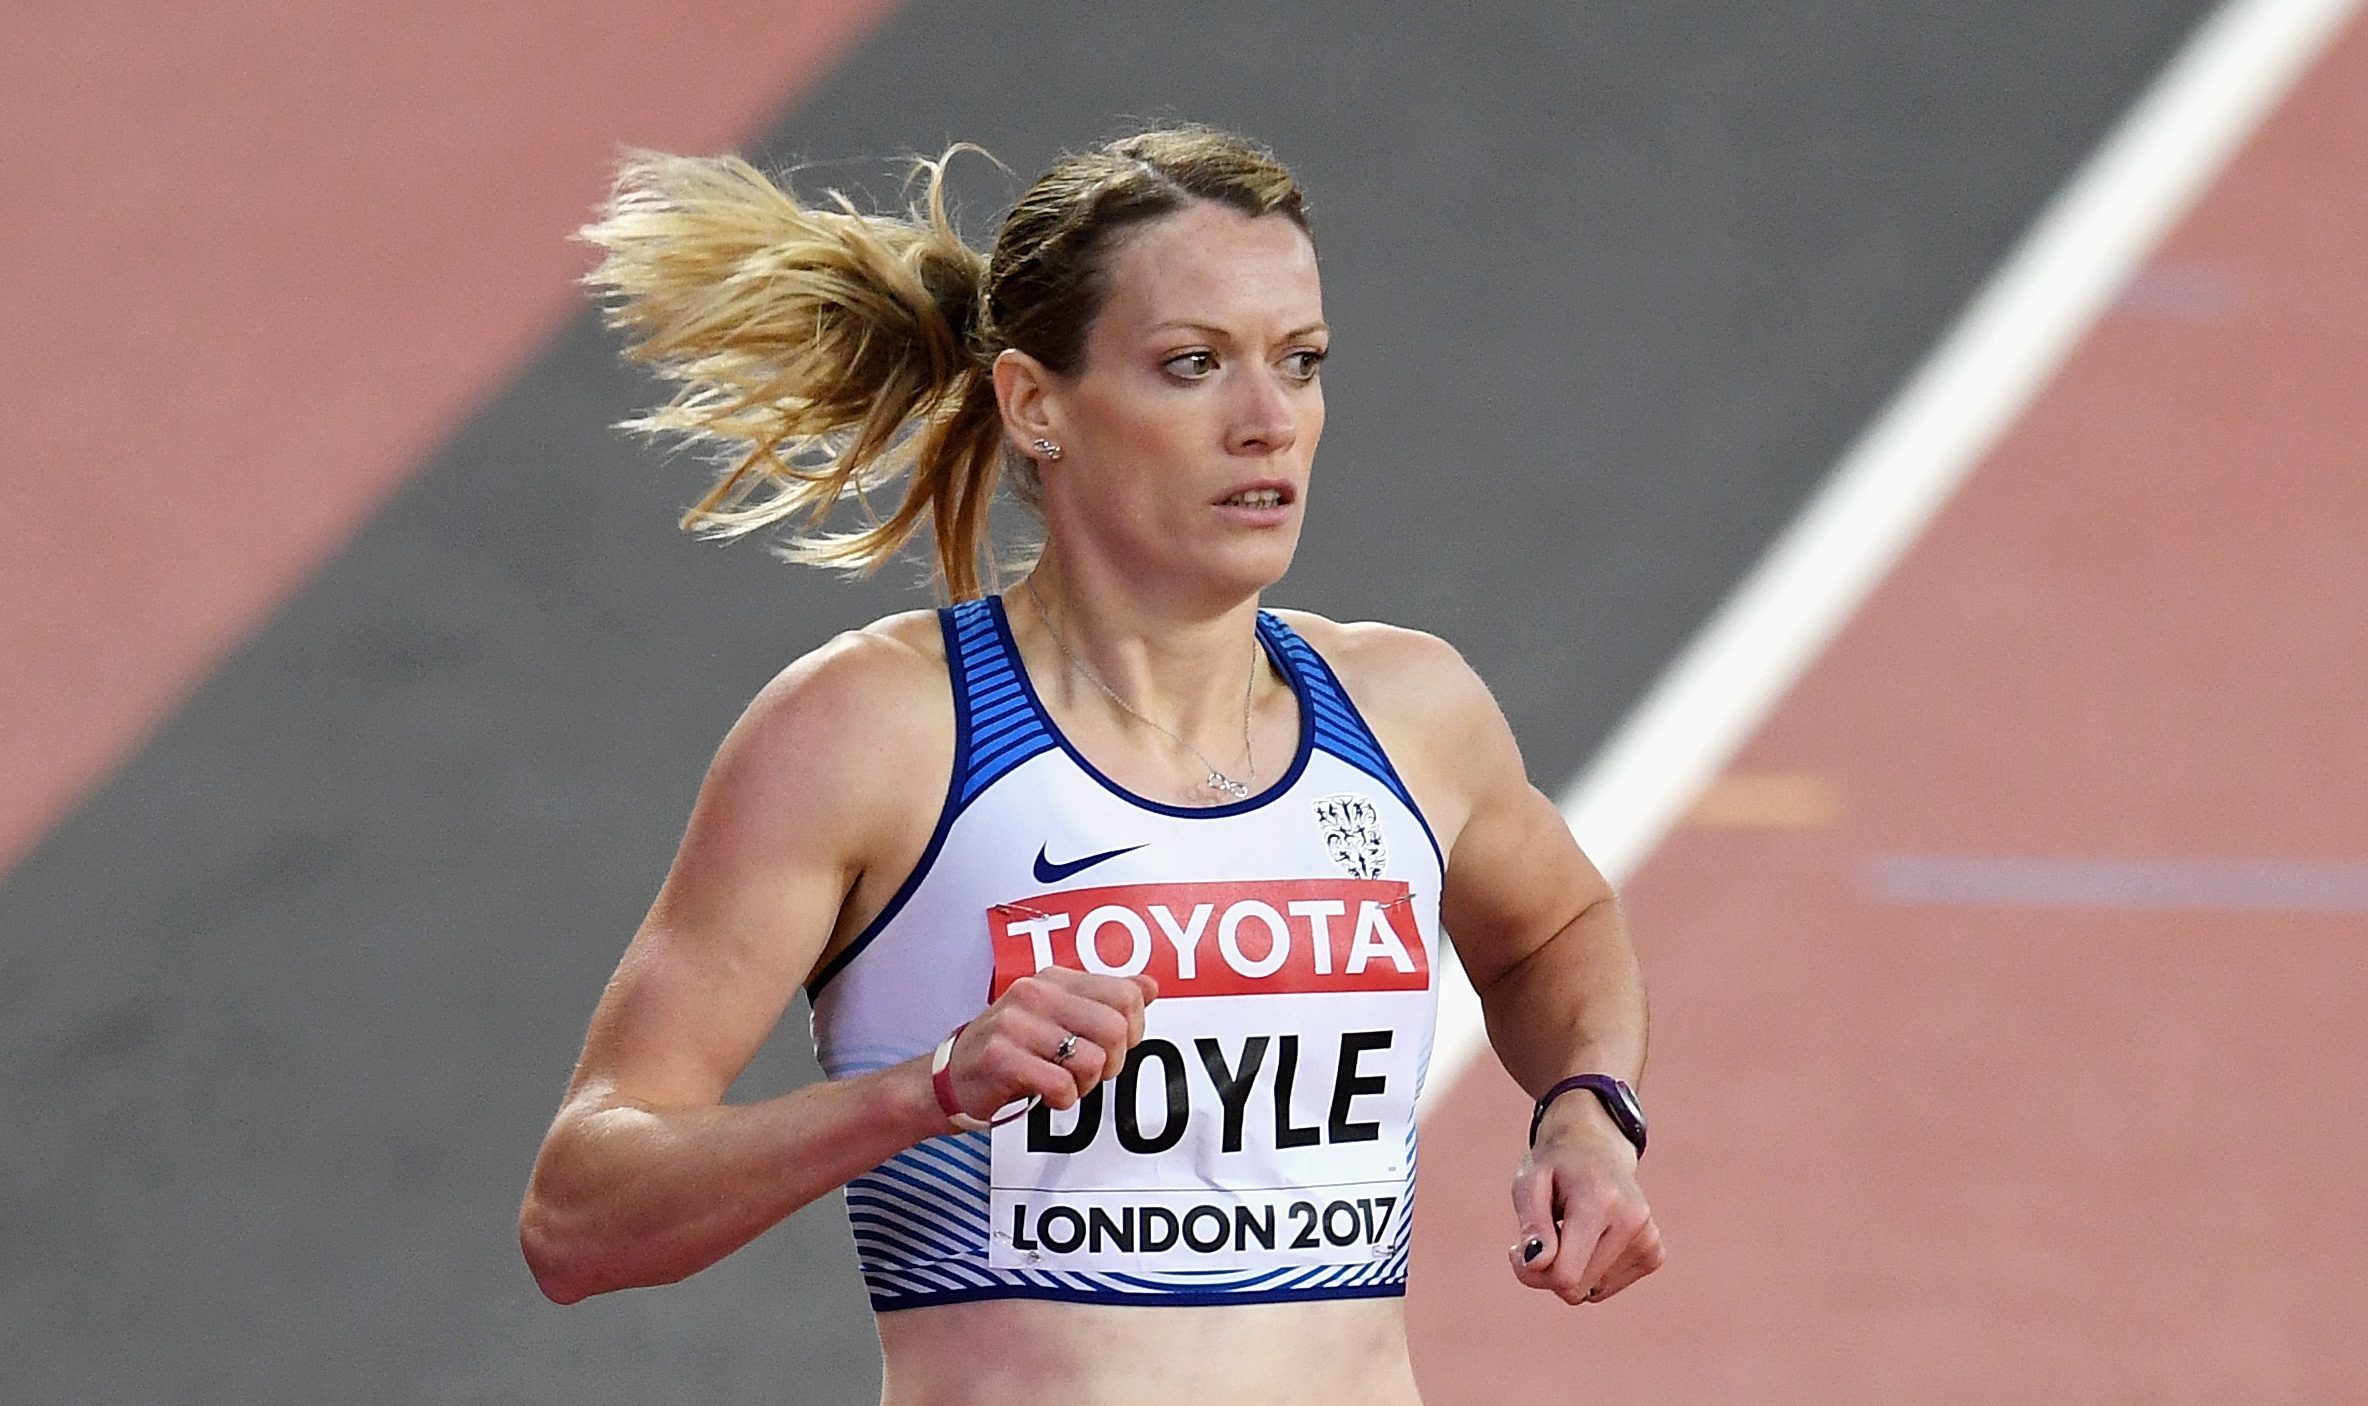 Eilidh Doyle of Great Britain competes in the Women's 400 metres hurdles heats during day four of the 16th IAAF World Athletics Championships (David Ramos/Getty Images)